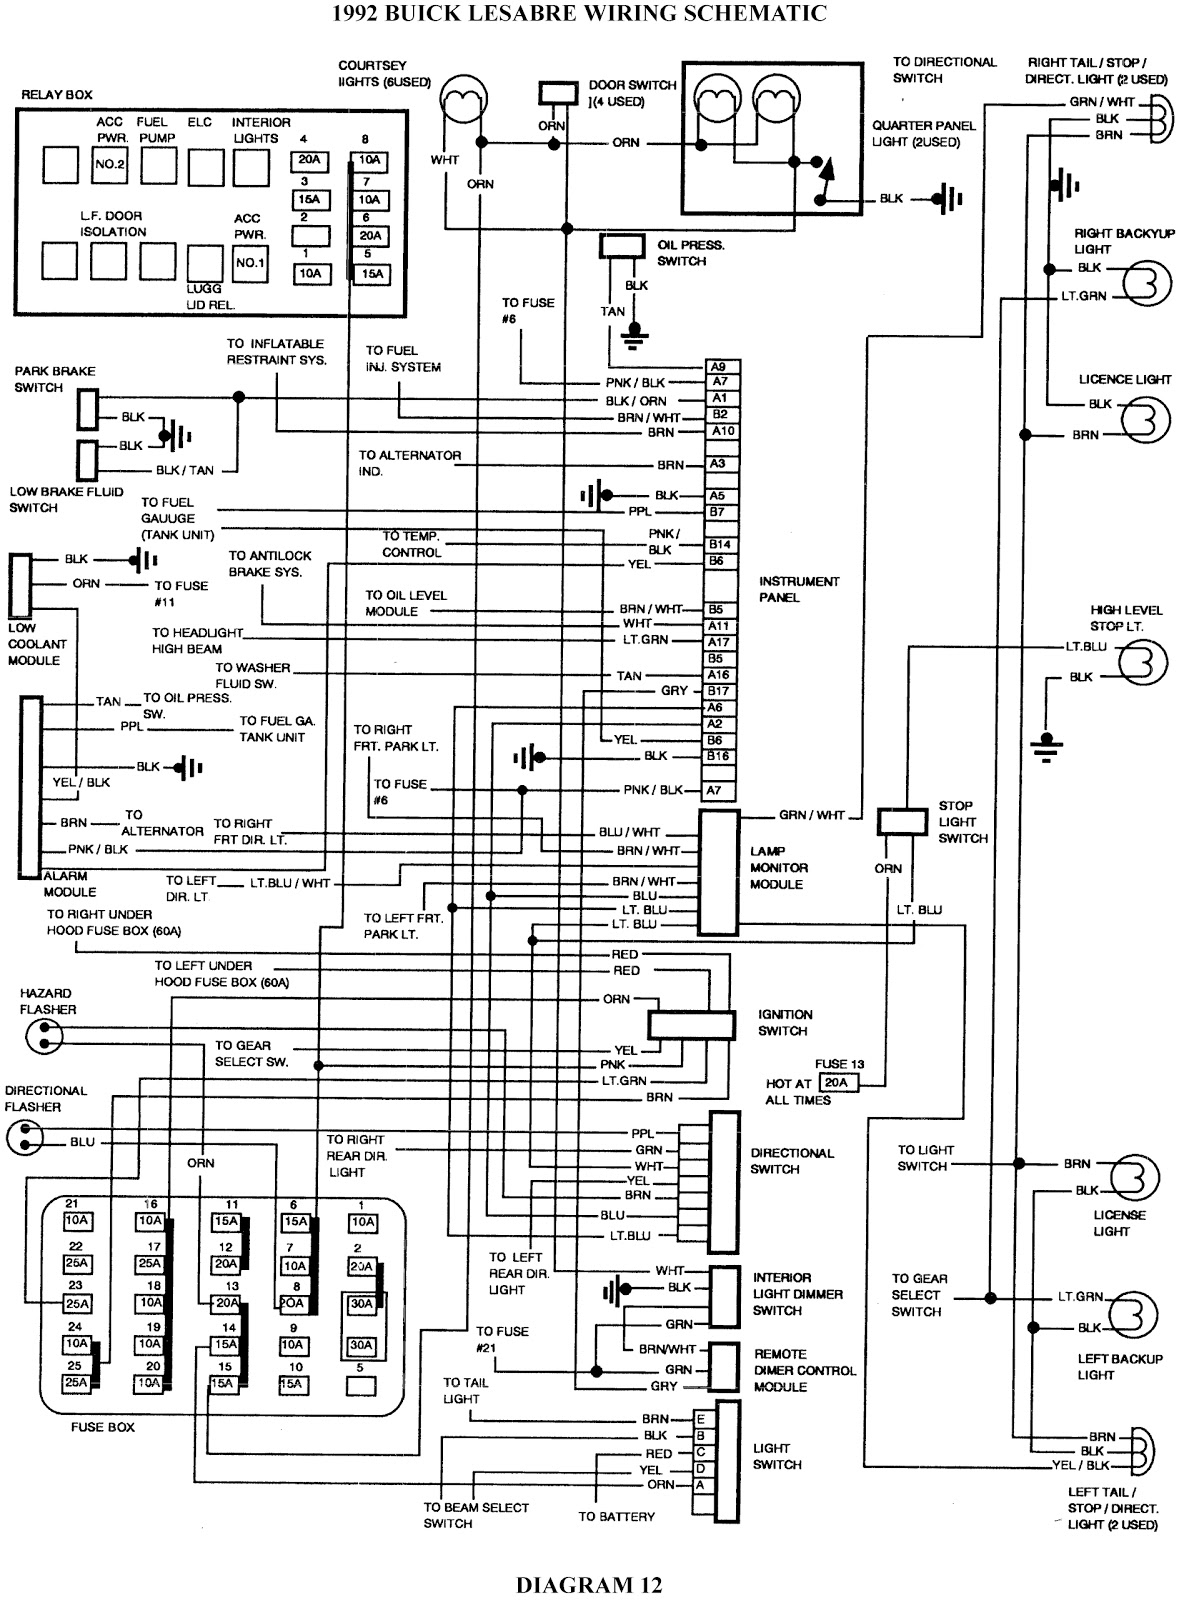 99 park ave lcm wiring diagram